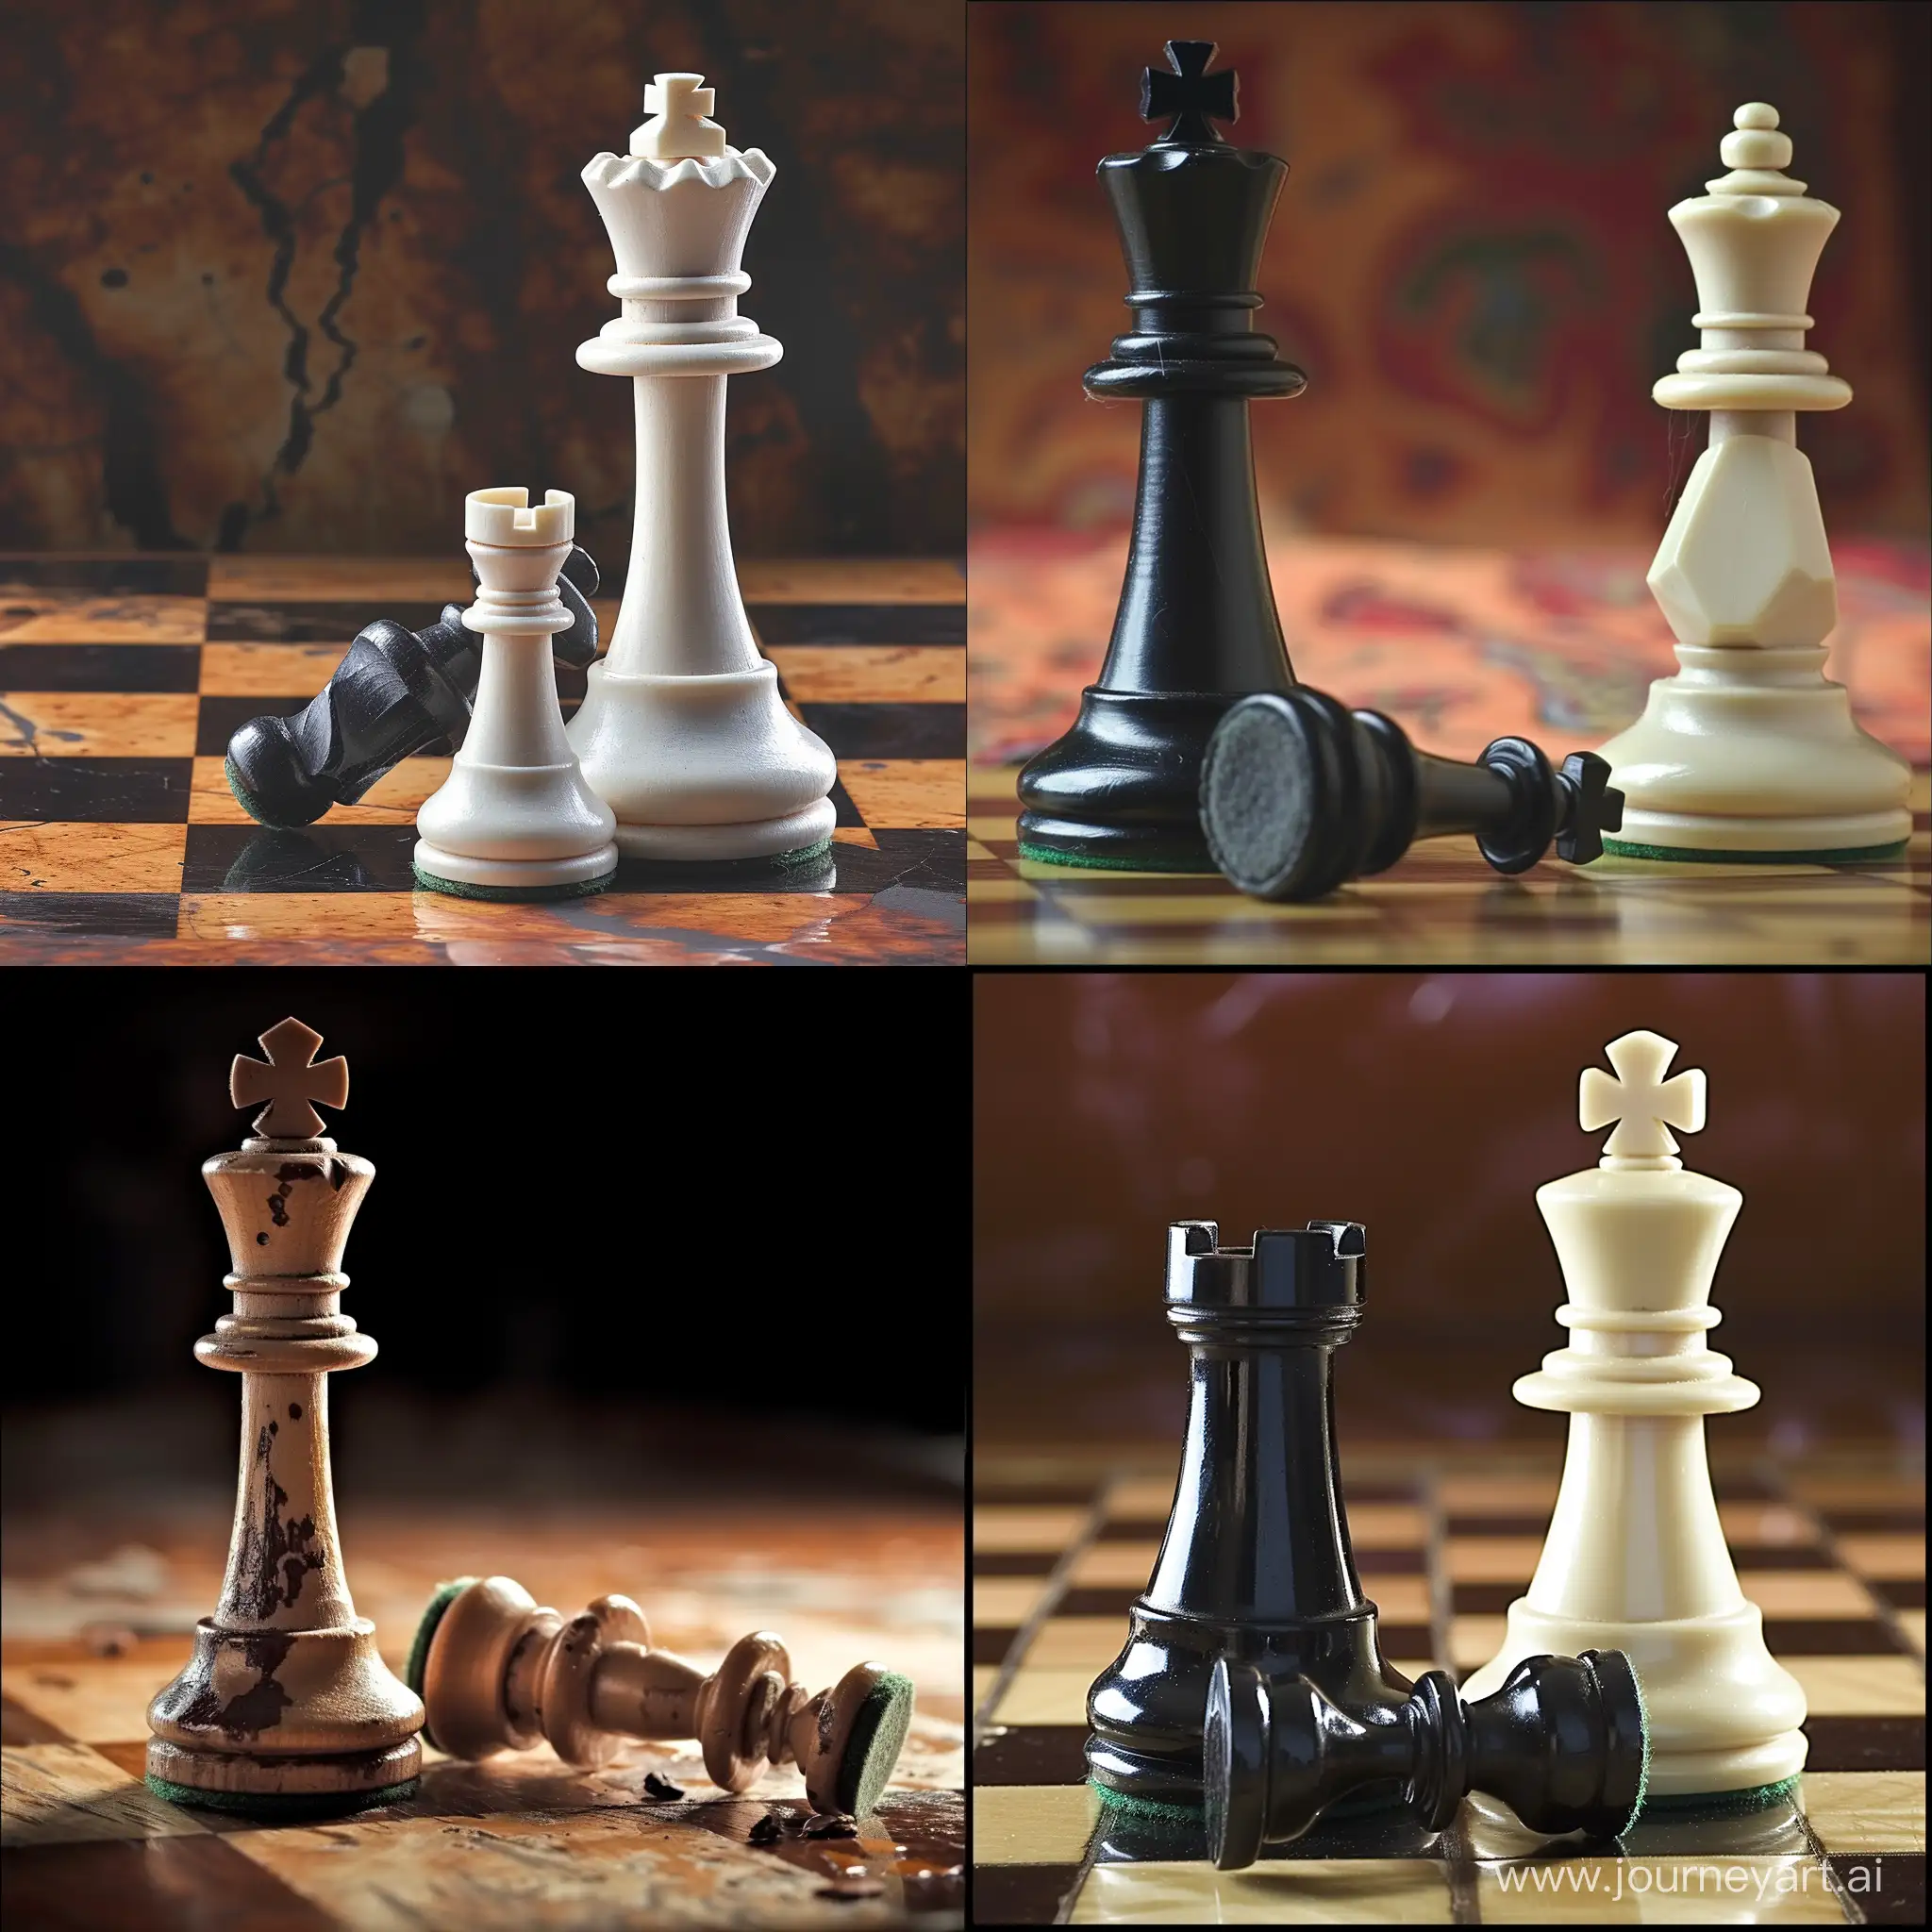 Strategic-Encounter-Chess-King-Confronts-Pawn-in-Intense-Battle